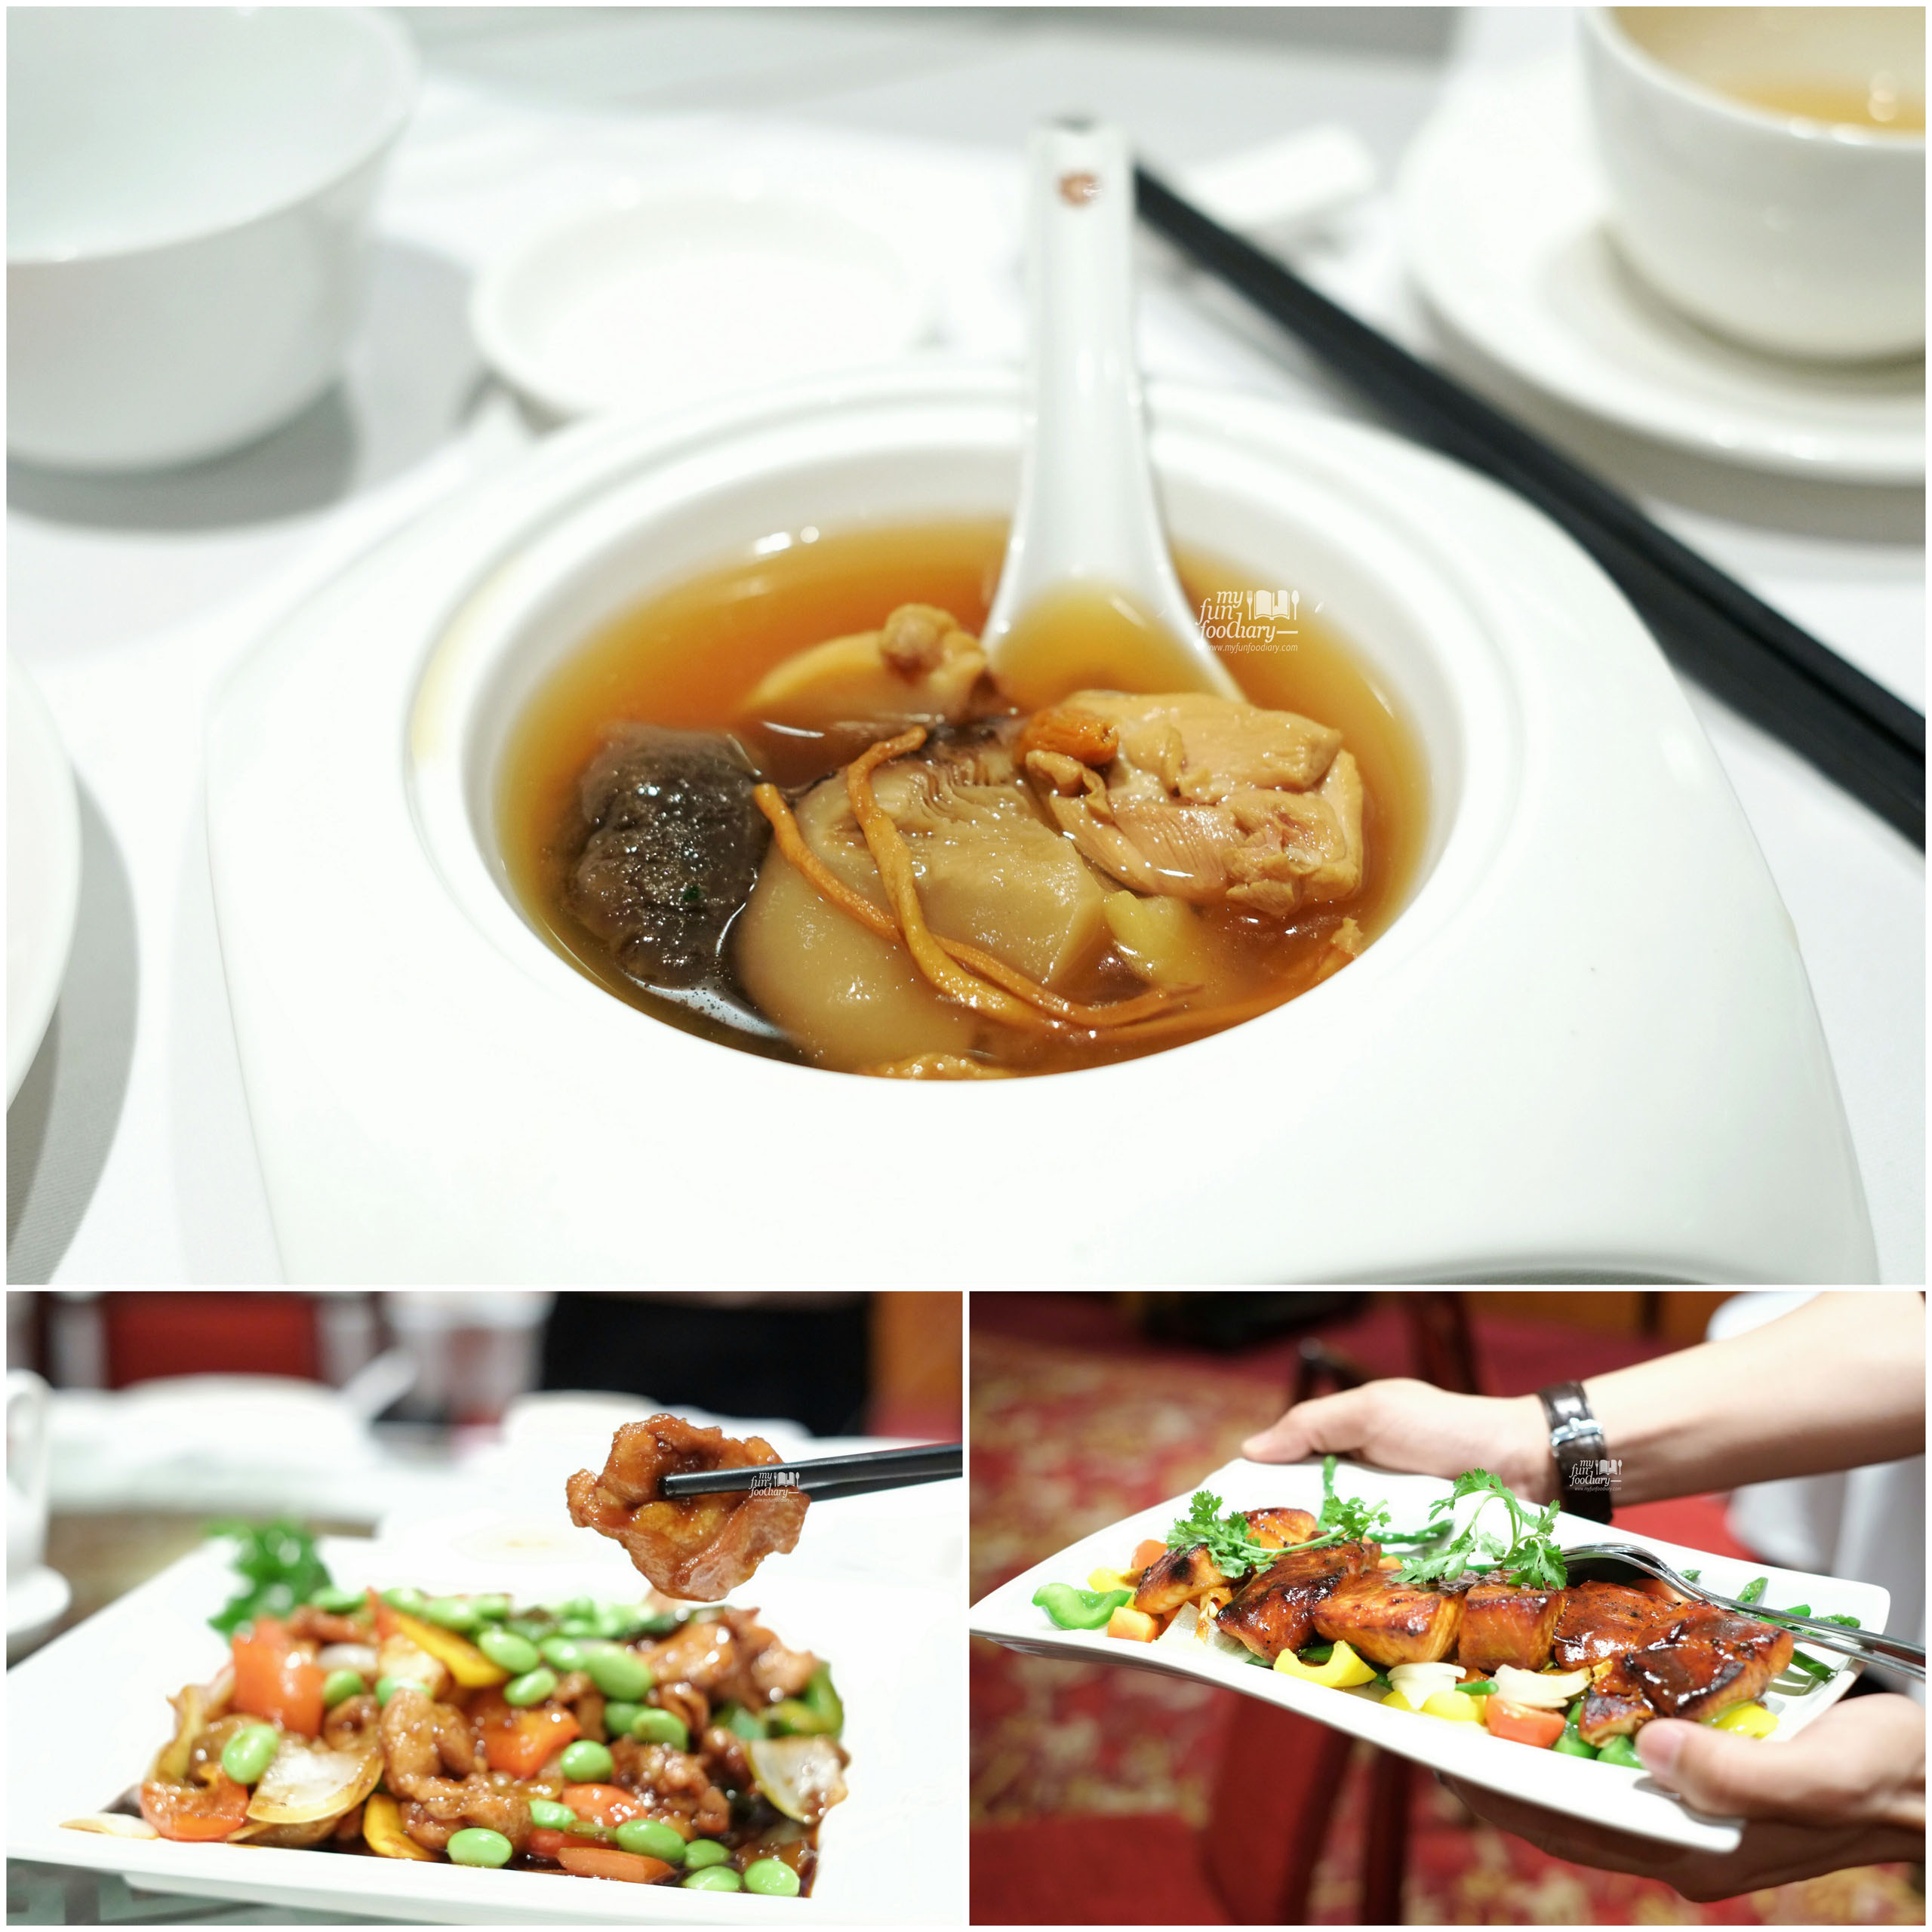 Soup and Salmon Fillet and Sliced Chicken in Oyster Sauce at Shang Palace Shangrila Surabaya by Myfunfoodiary